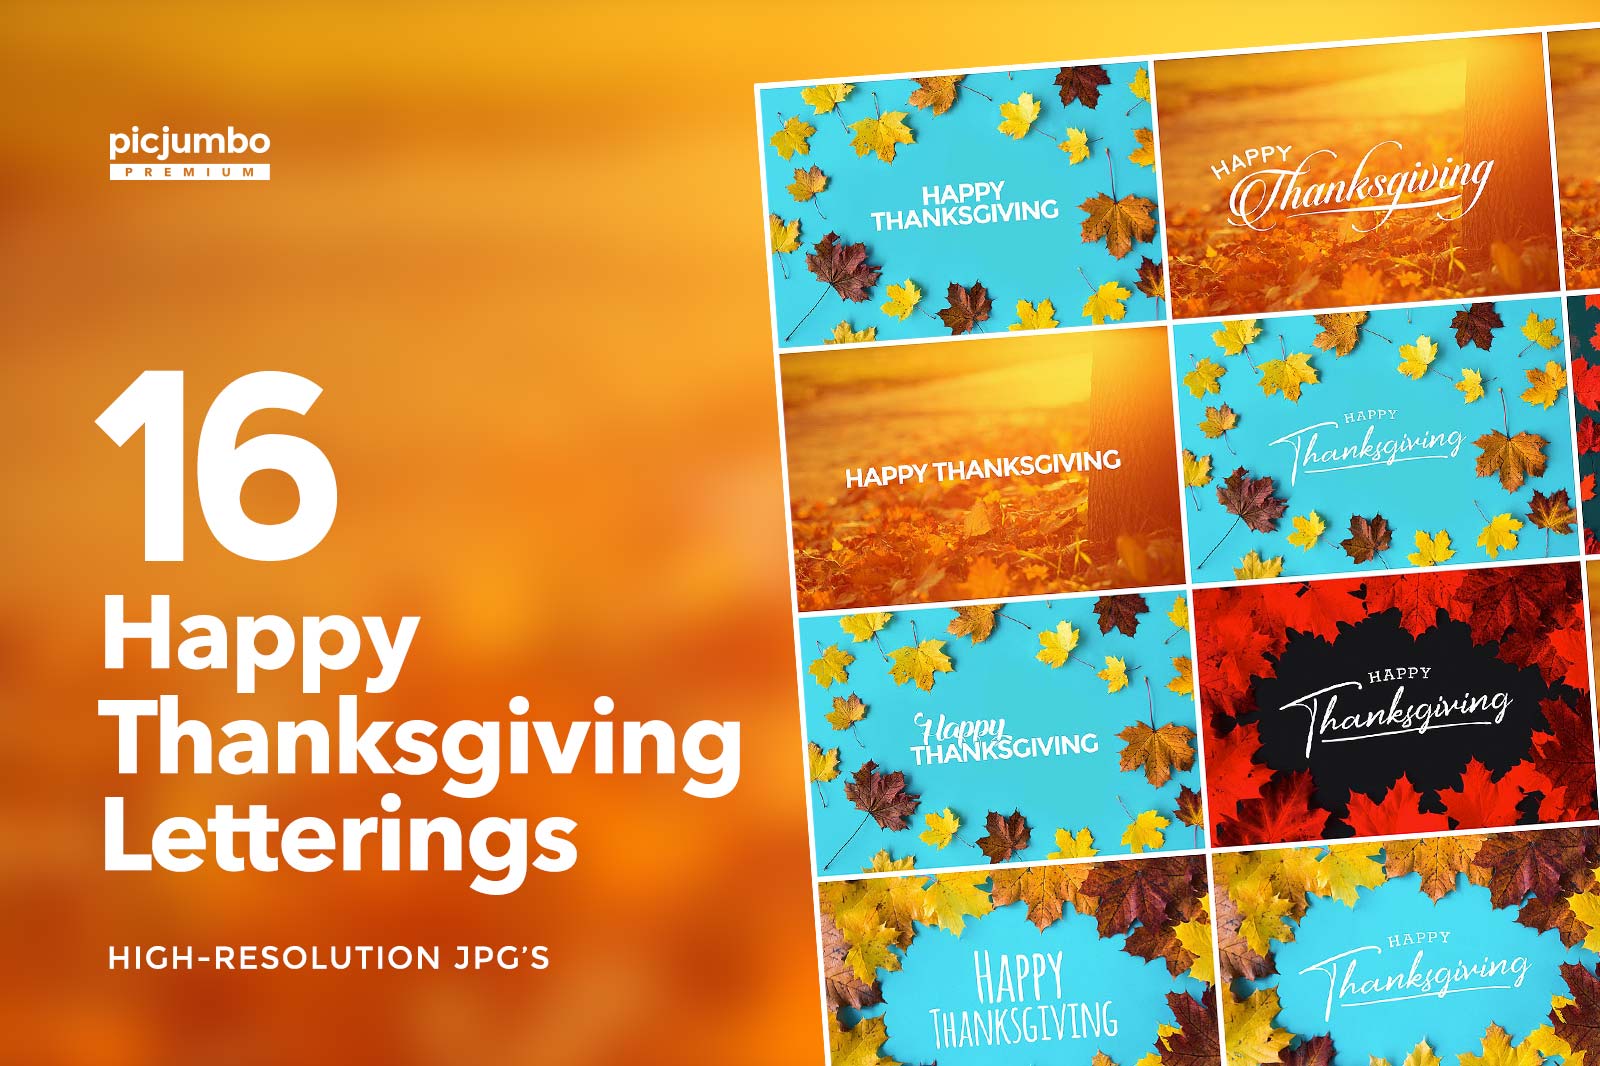 Download hi-res stock photos from our Happy Thanksgiving Letterings PREMIUM Collection!